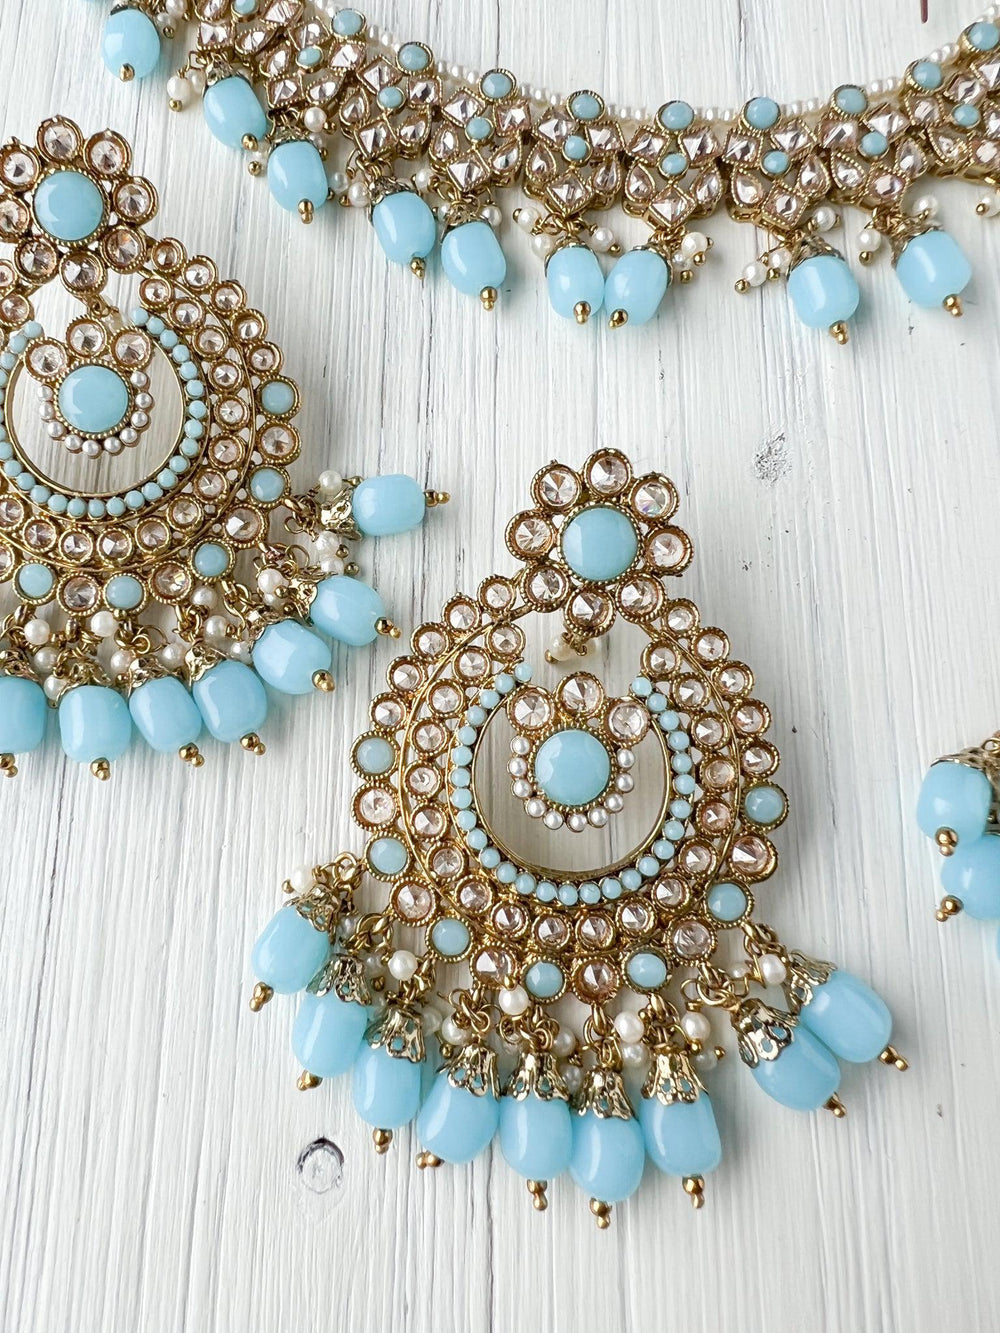 Skeptic in Sky Blue *AS-IS* Necklace Sets THE KUNDAN SHOP 